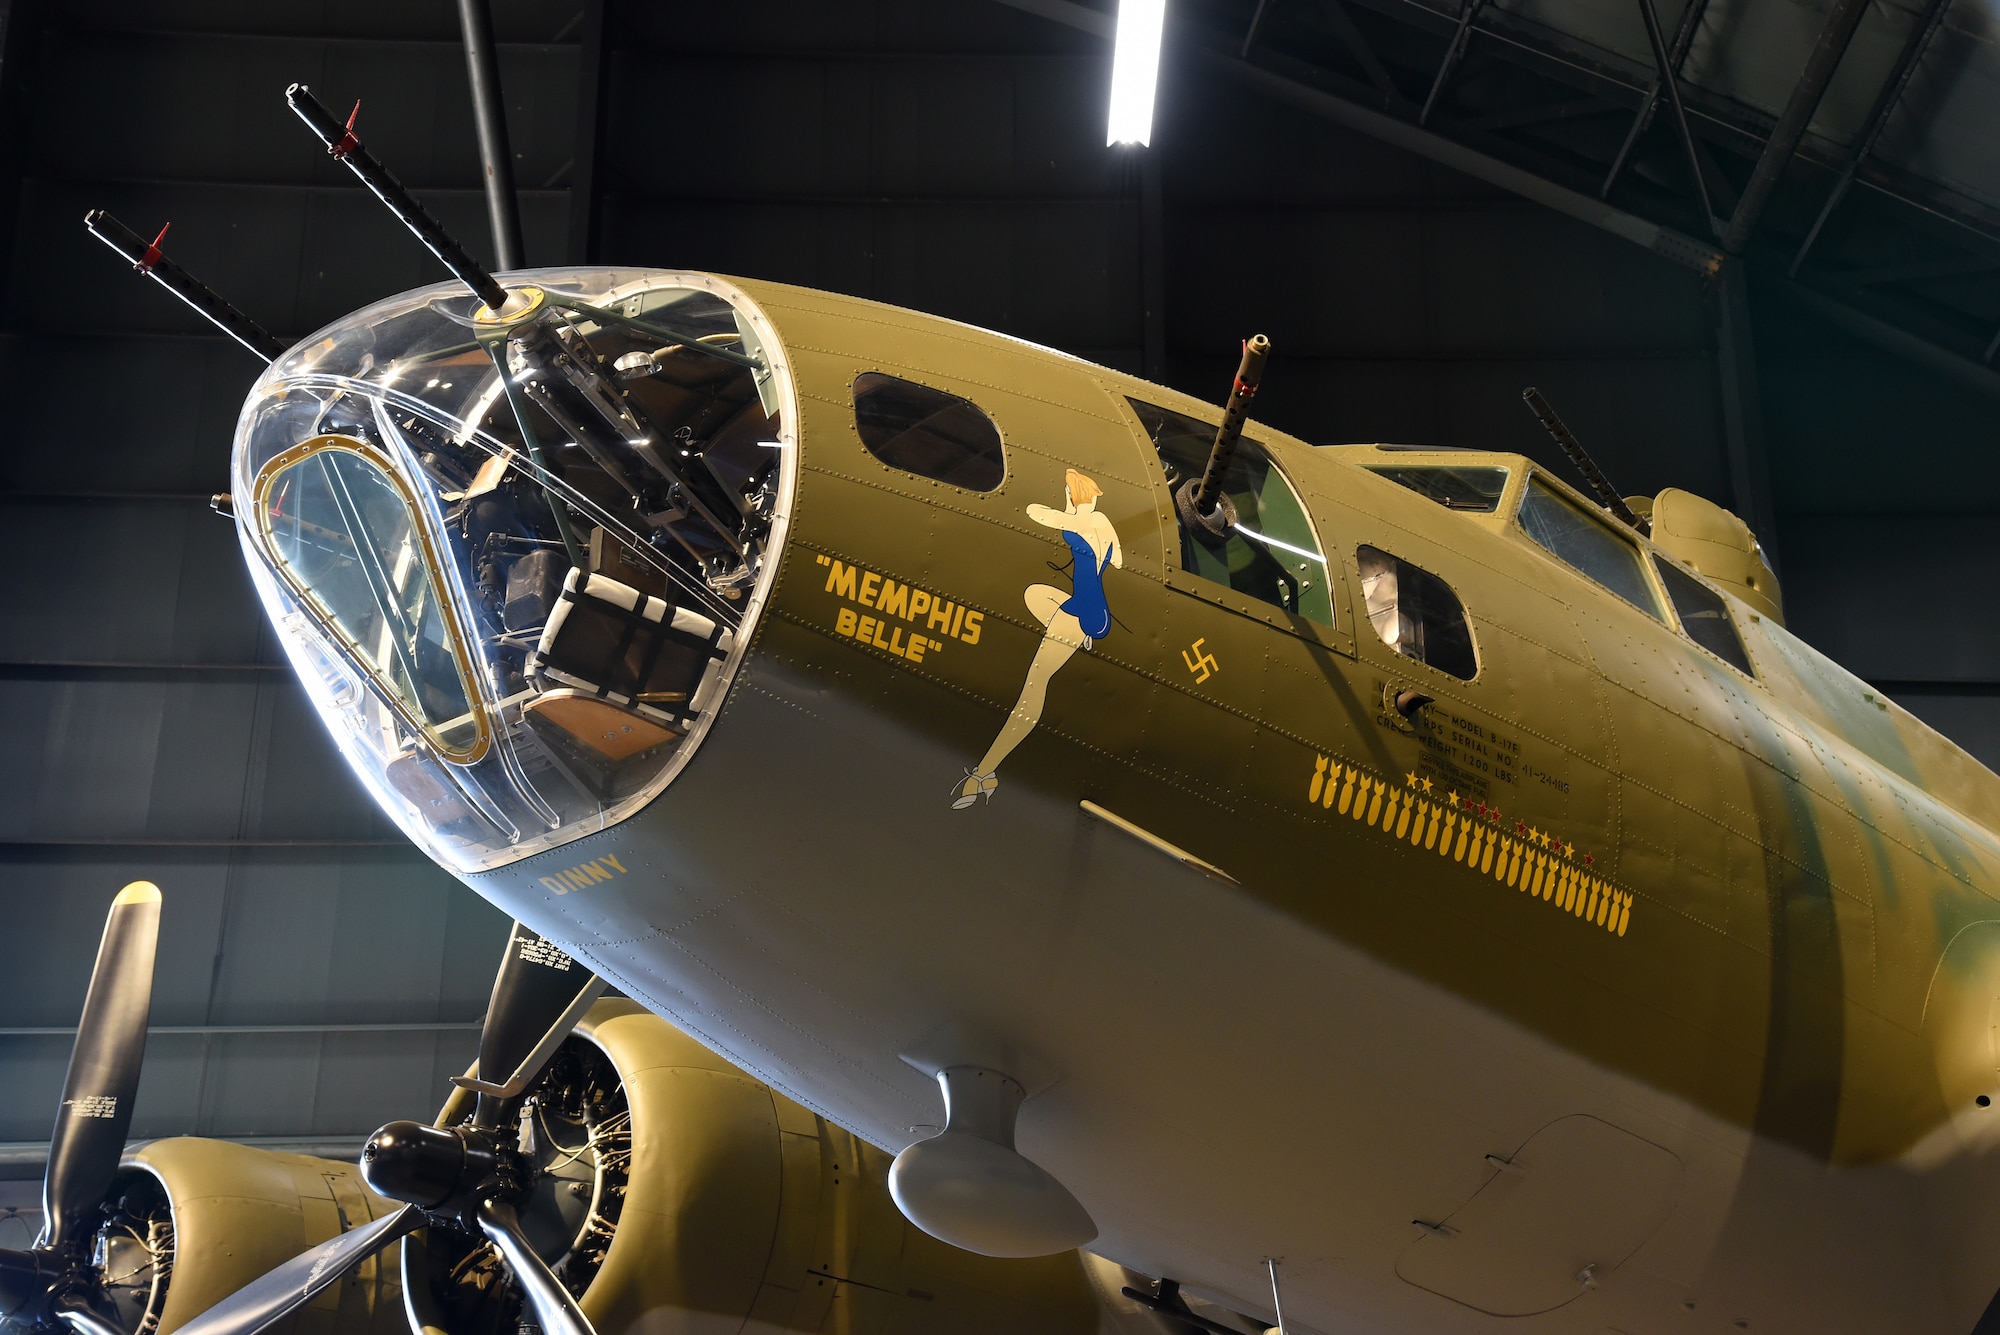 DAYTON, Ohio -- Boeing B-17F Memphis Belle on display in the WWII Gallery at the National Museum of the United States Air Force. B-17's flew in every combat zone during World War II, but its most significant service was over Europe. Along with the B-24 Liberator, the B-17 formed the backbone of the USAAF strategic bombing force, and it helped win the war by crippling Germany’s war industry. (U.S. Air Force photo by Ken LaRock)